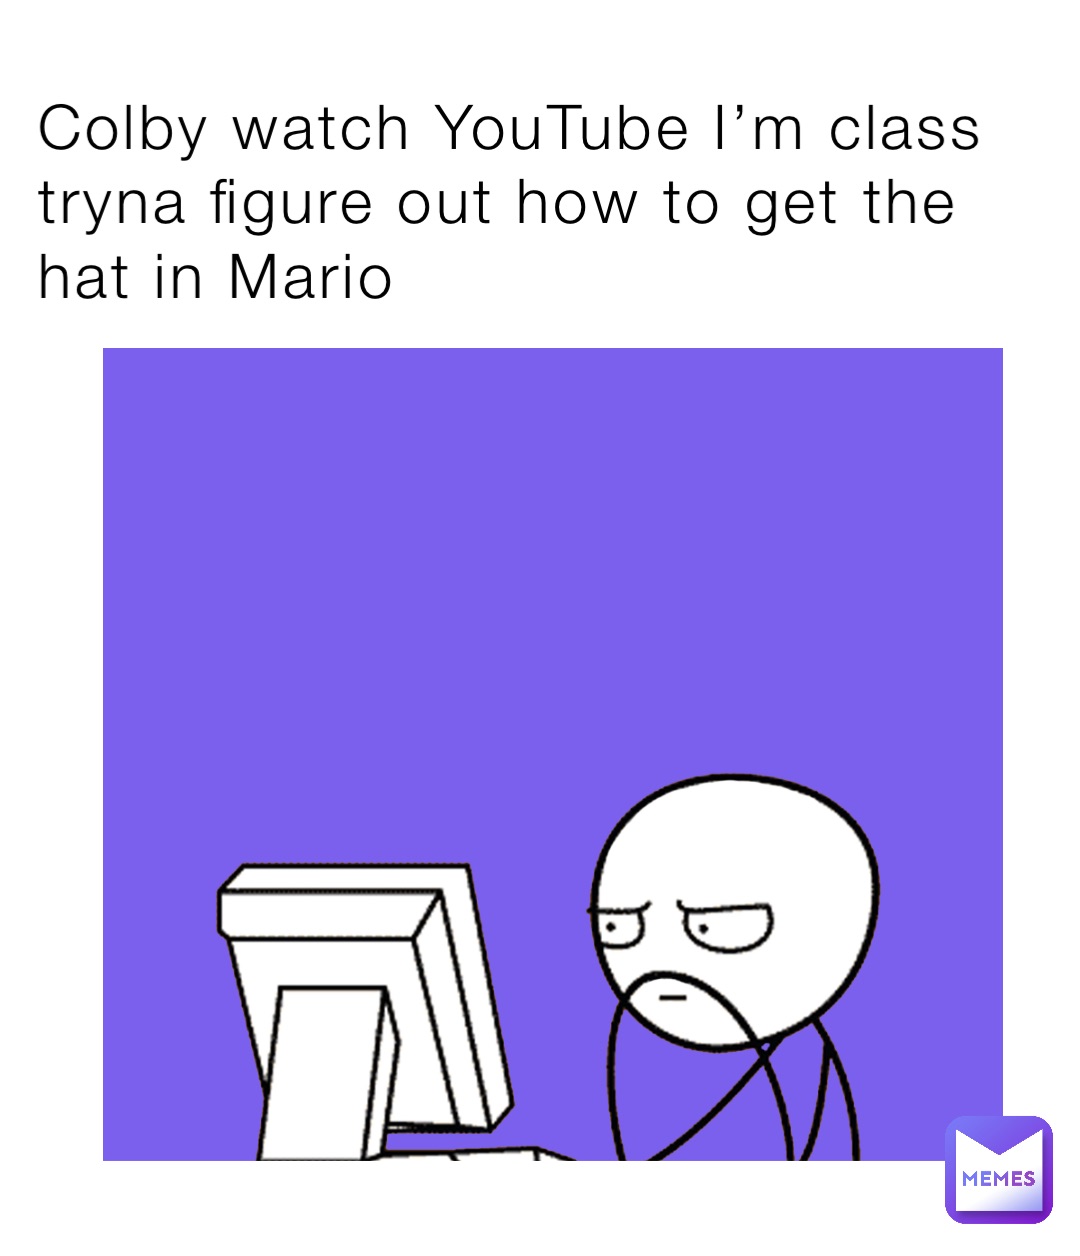 Colby watch YouTube I’m class tryna figure out how to get the hat in Mario